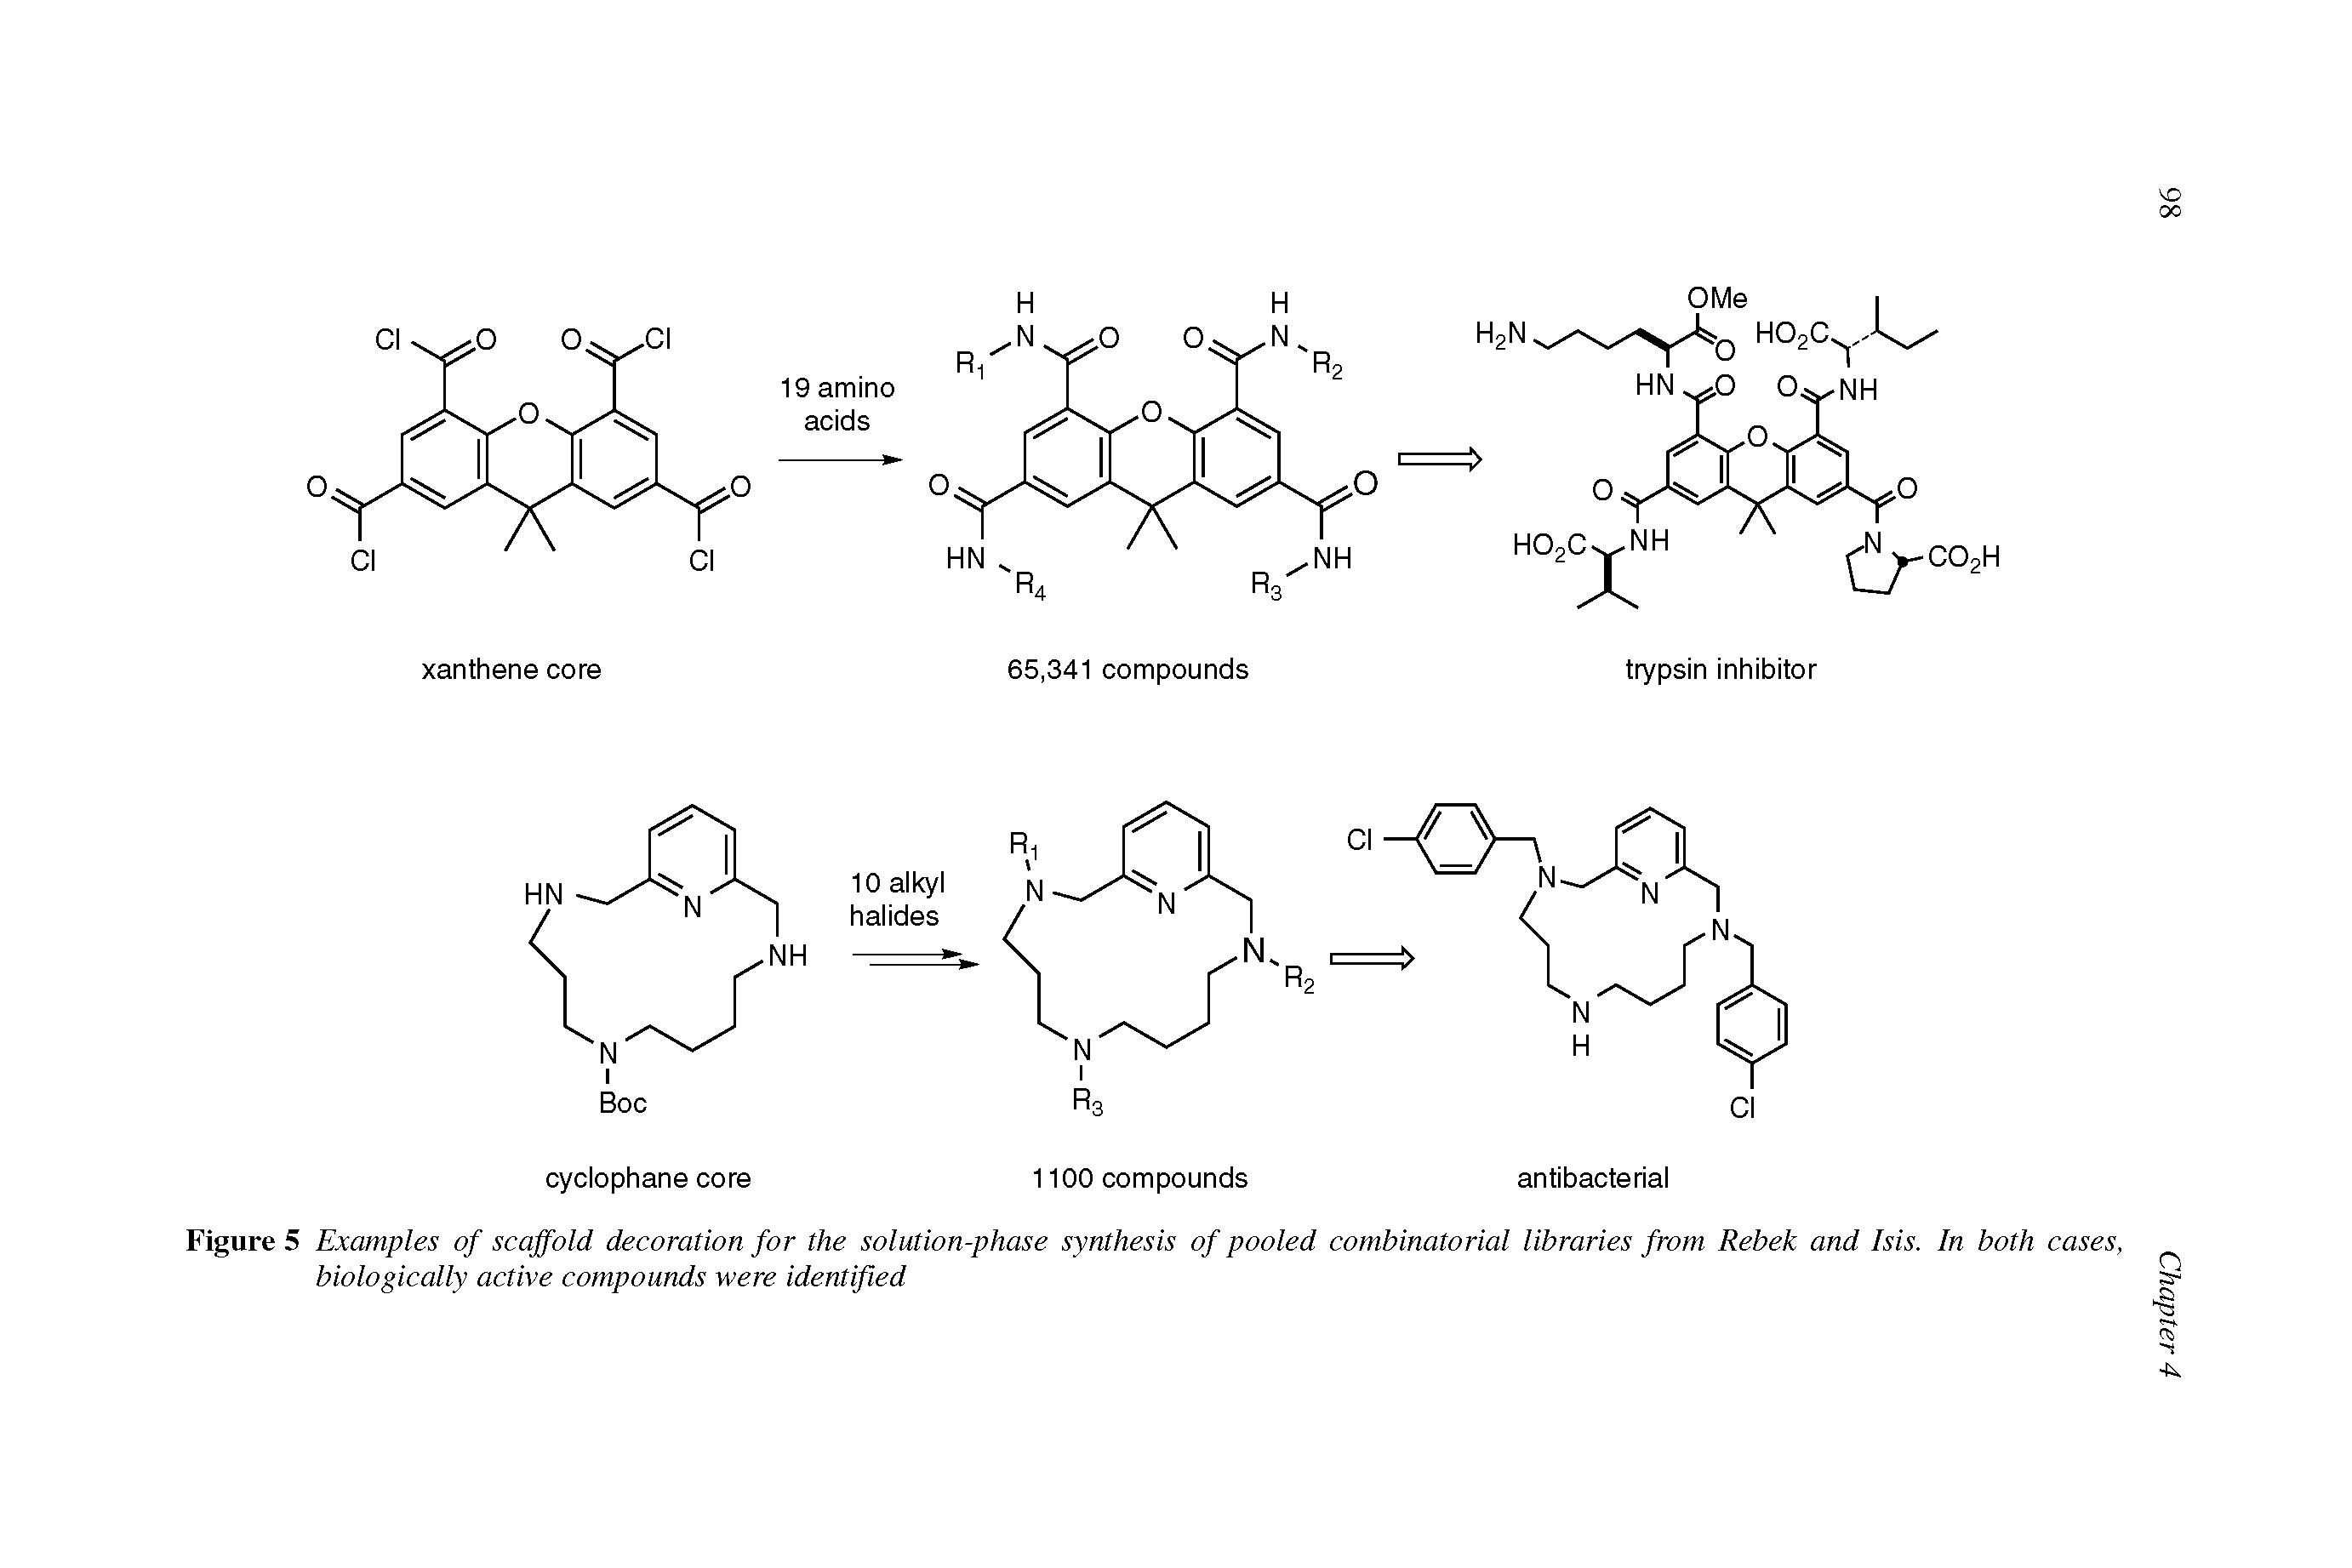 Figure 5 Examples of scaffold decoration for the solution-phase synthesis of pooled combinatorial libraries from Rebek and Isis. In both cases, biologically active compounds were identified...